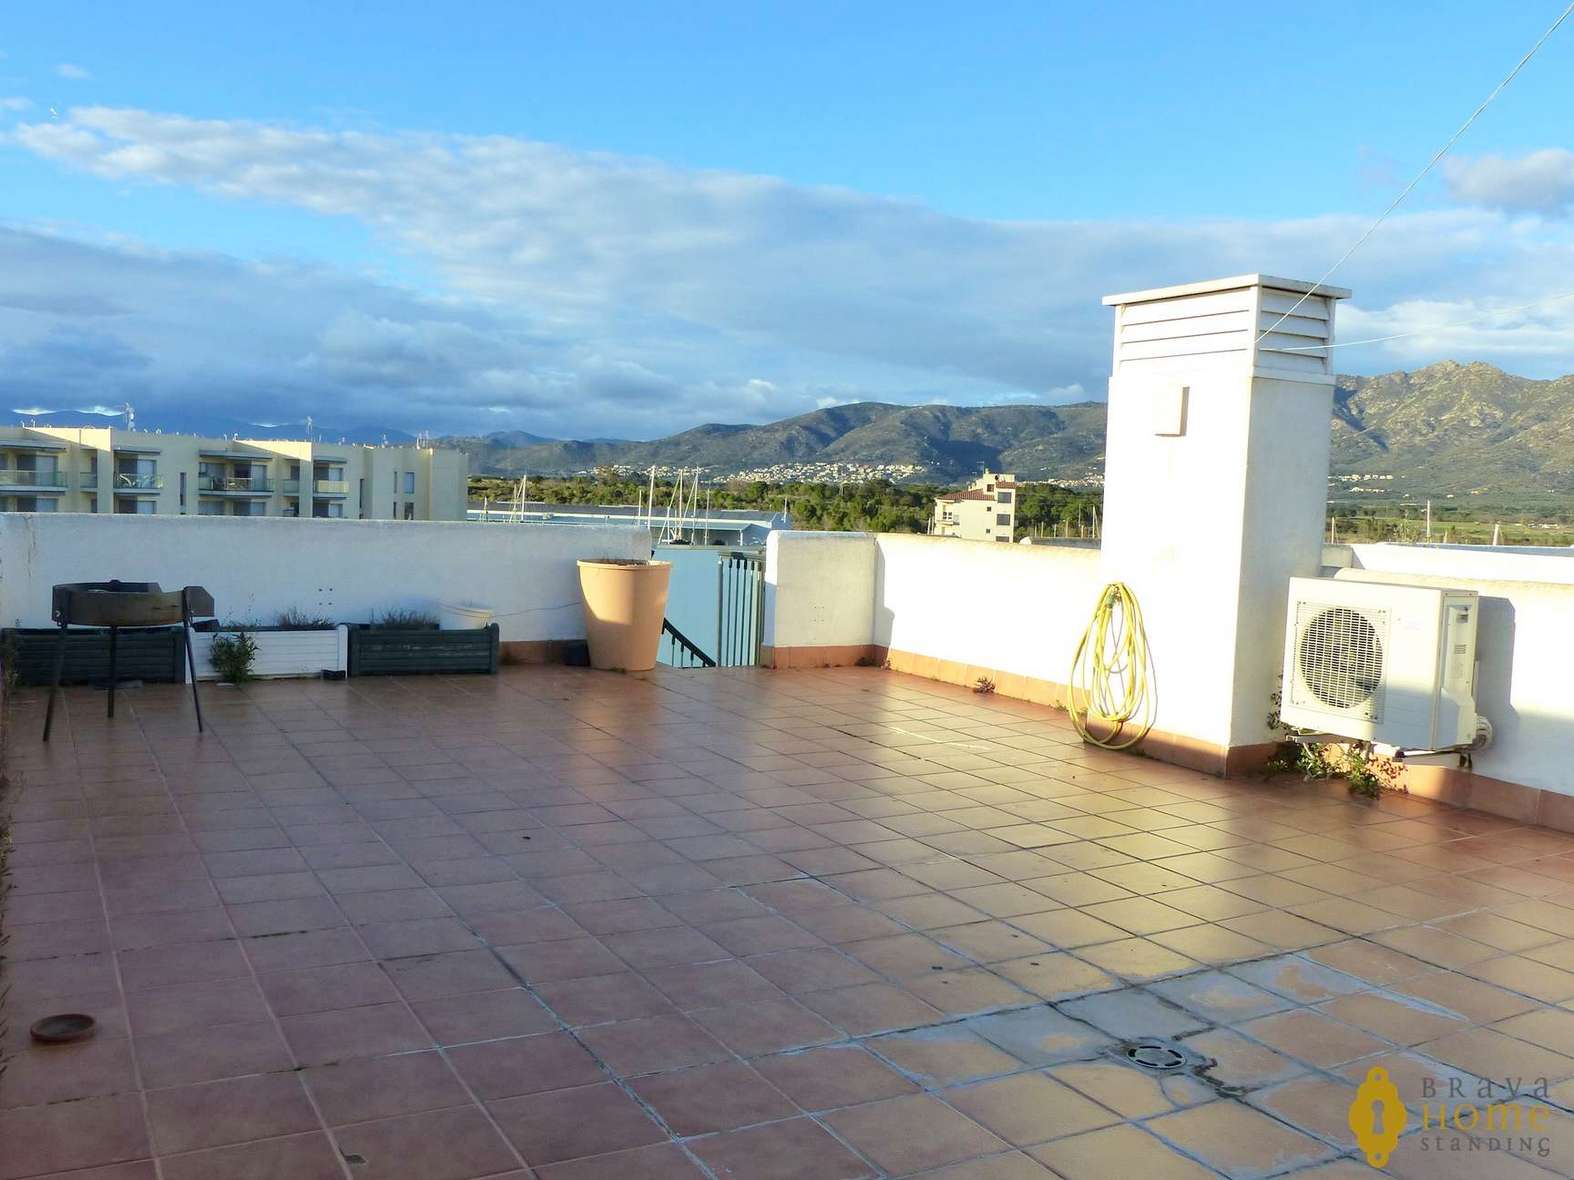 Top floor apartment with views over the canal for sale in Rosas - Santa Margarita